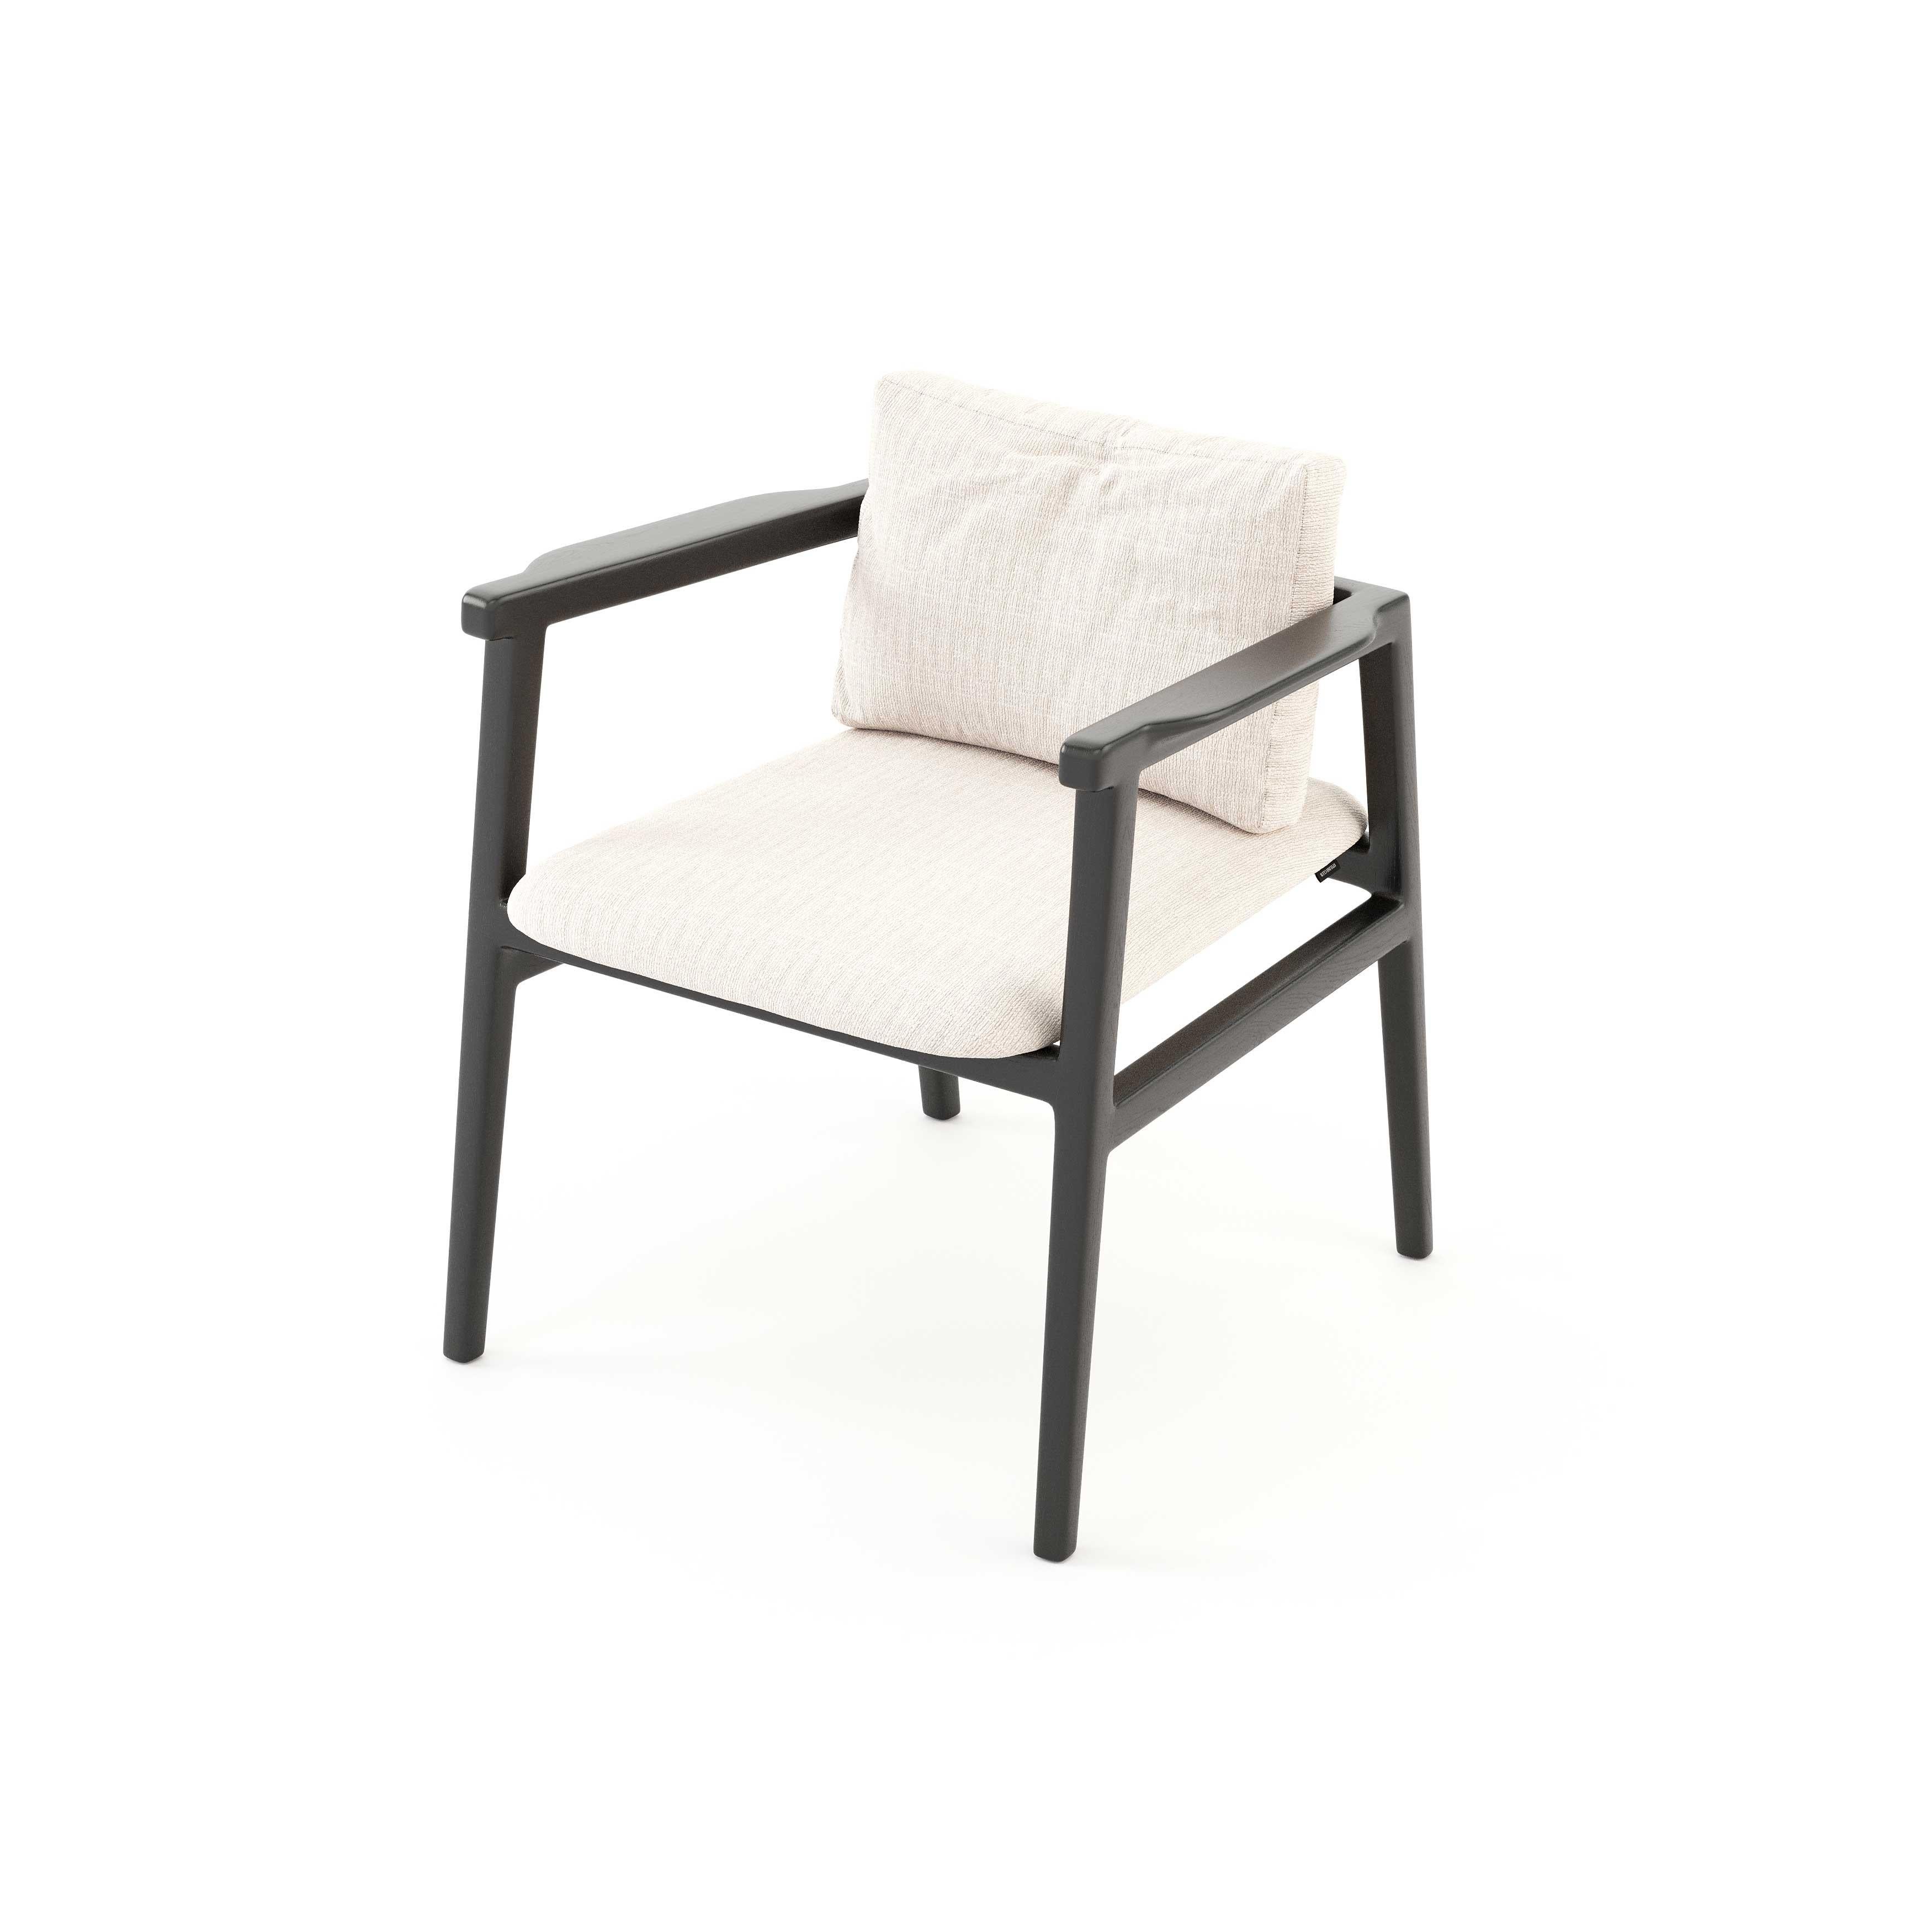 Hand-Crafted Modern Toro Dining Chair made with wood and textile, Handmade by Stylish Club For Sale